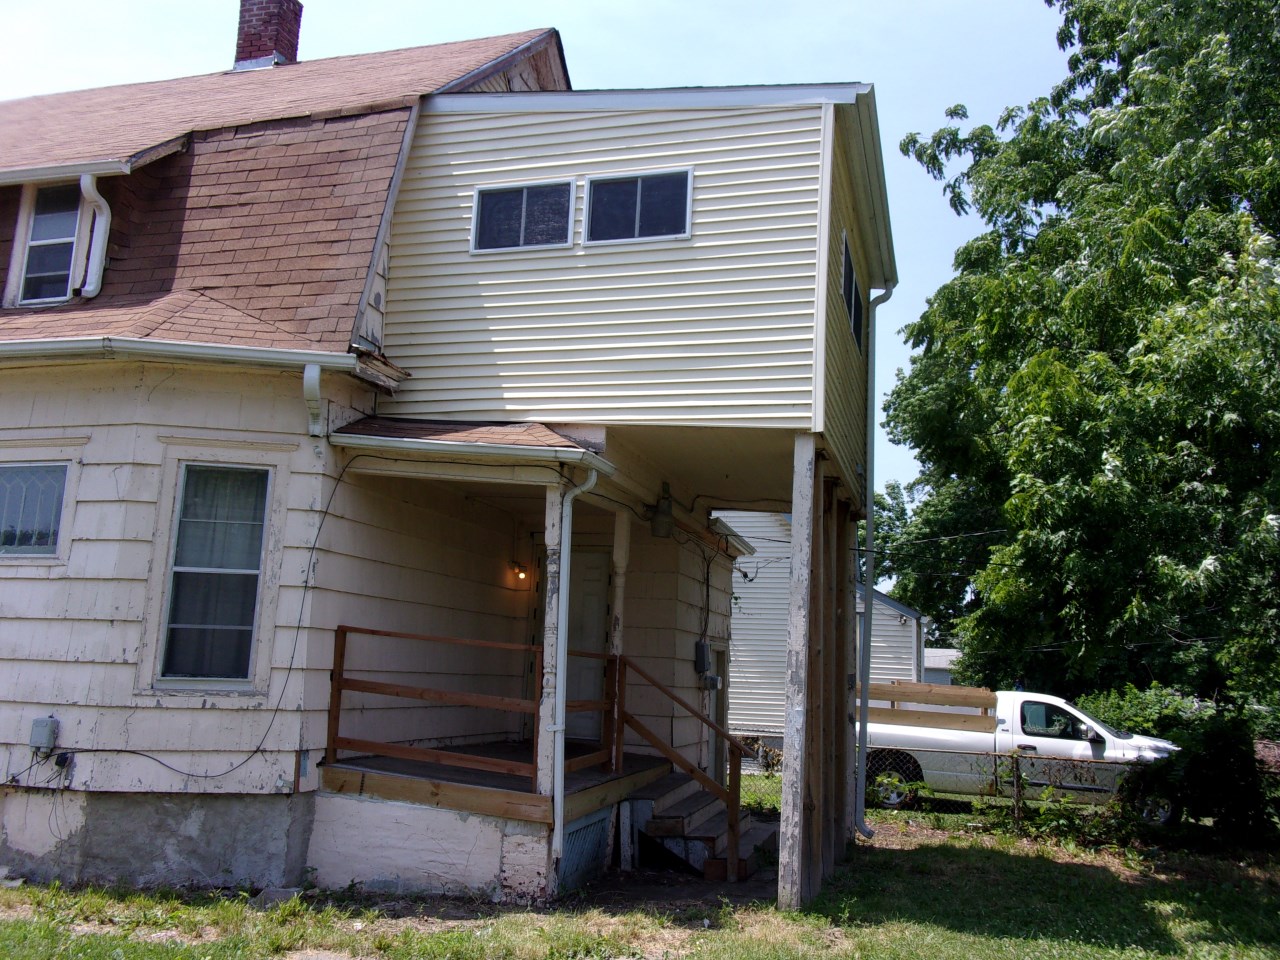 This rental property with an unsafe addition is an example of what LB85 would help avoid.